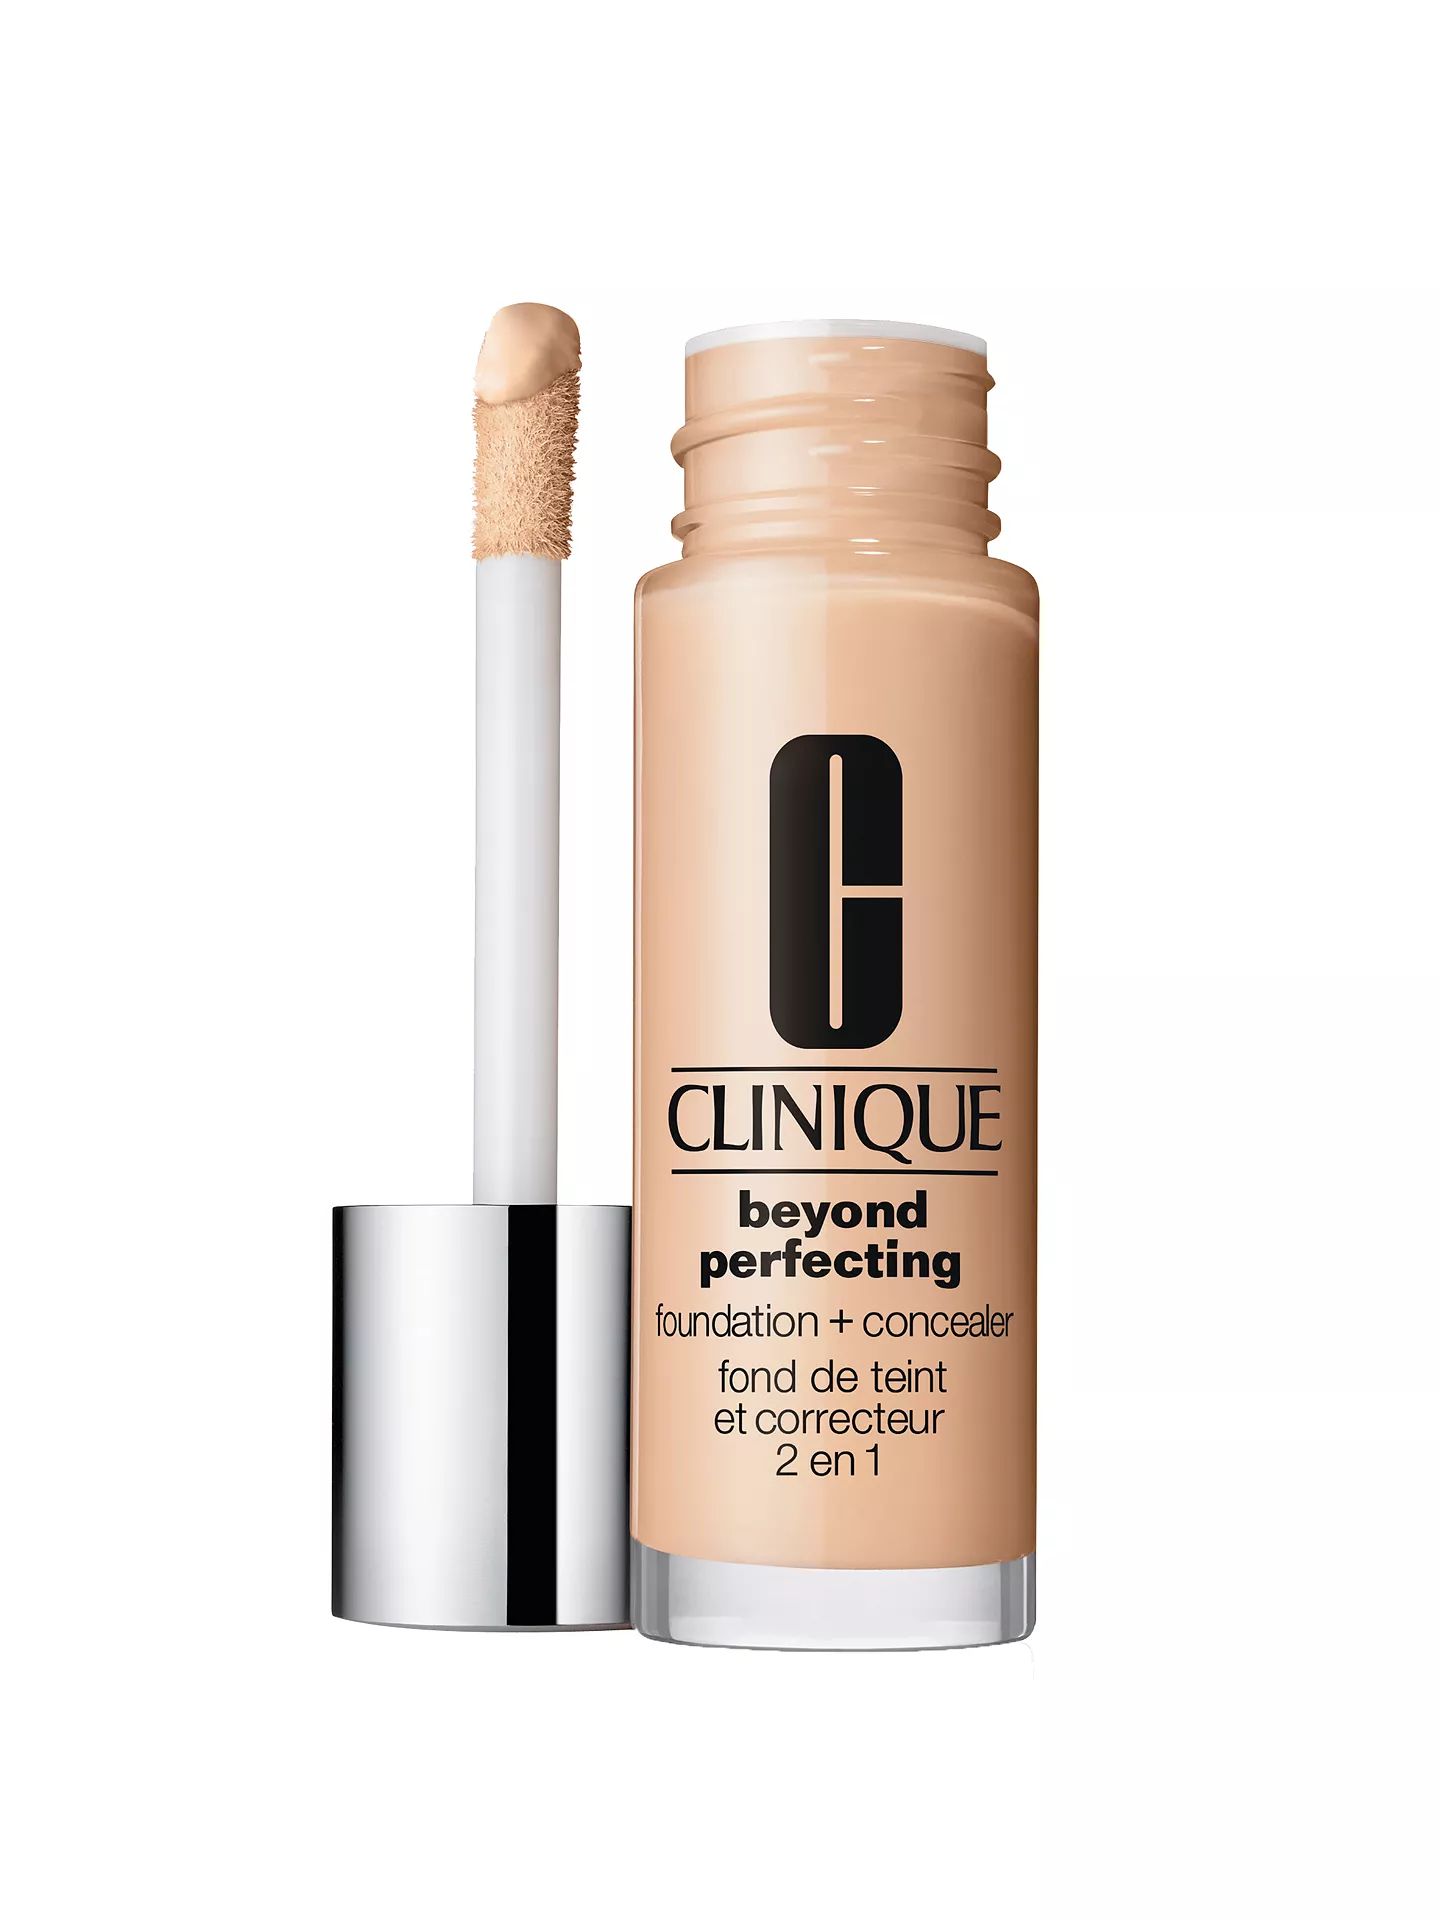 Clinique Beyond Perfecting Foundation + Concealer, 06 Ivory | John Lewis UK